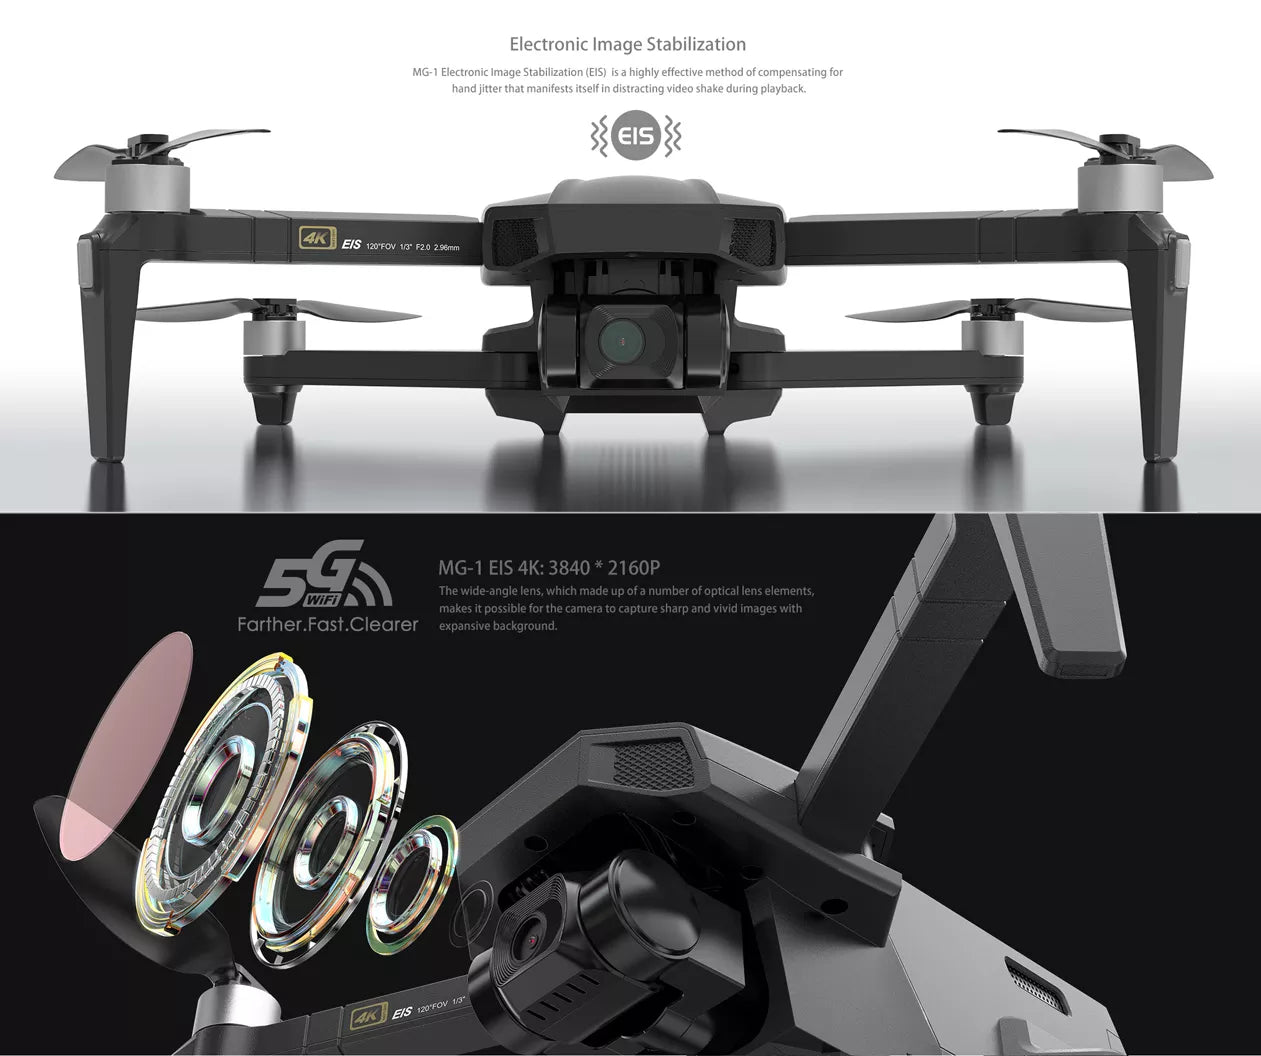 MJX MG-1 Drone, MG Electronic Image Stabilization (EIS) is a highly effectlve method